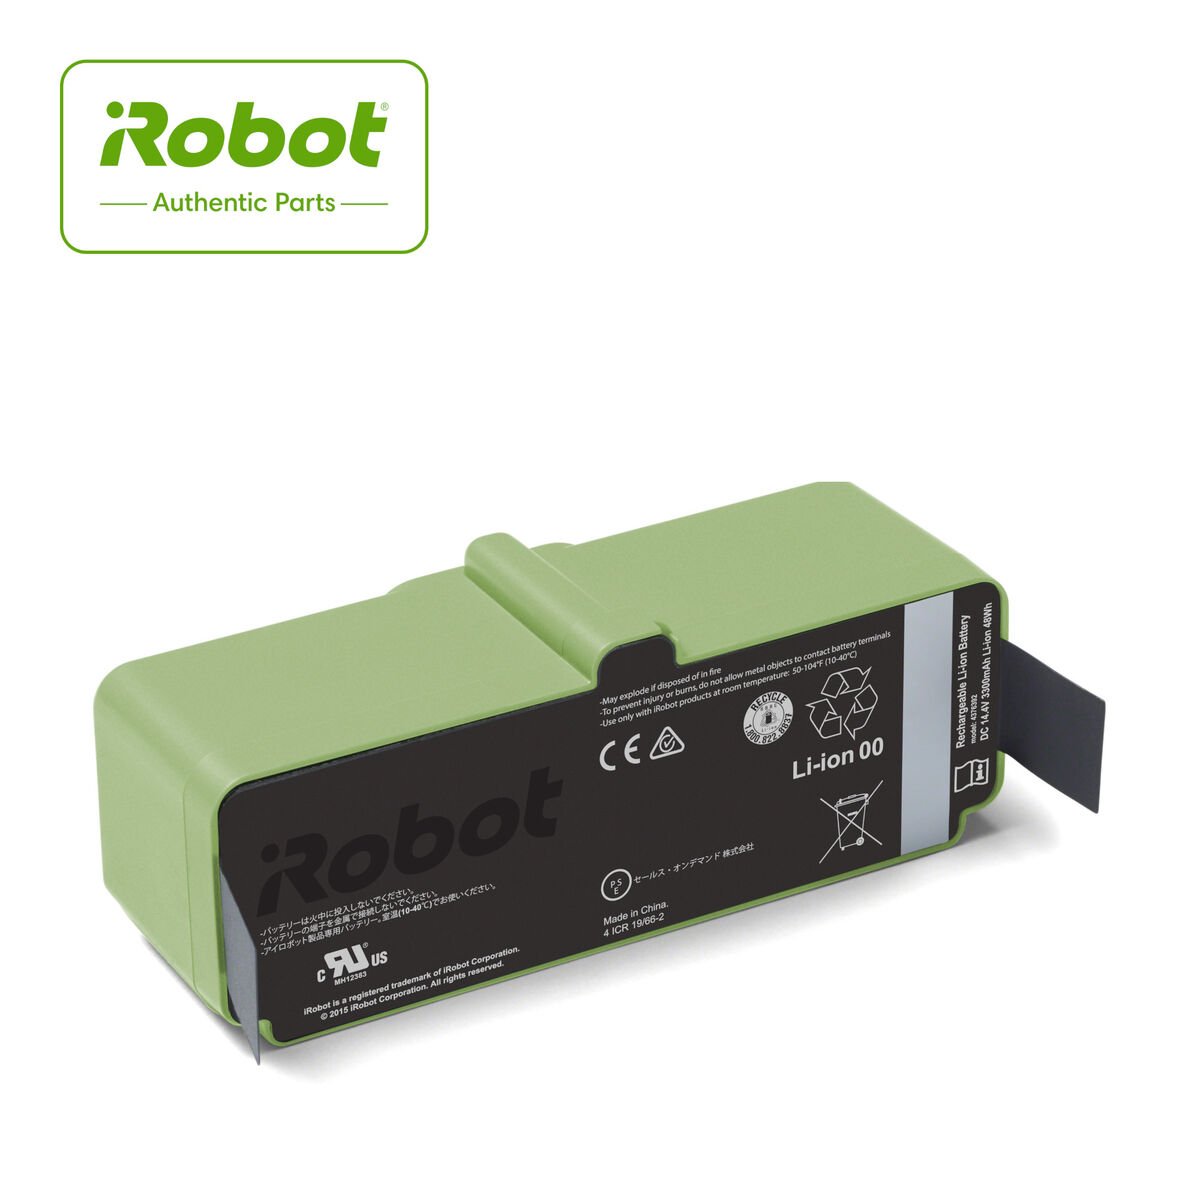 Roomba® 3300 Lithium Ion Battery image number 0